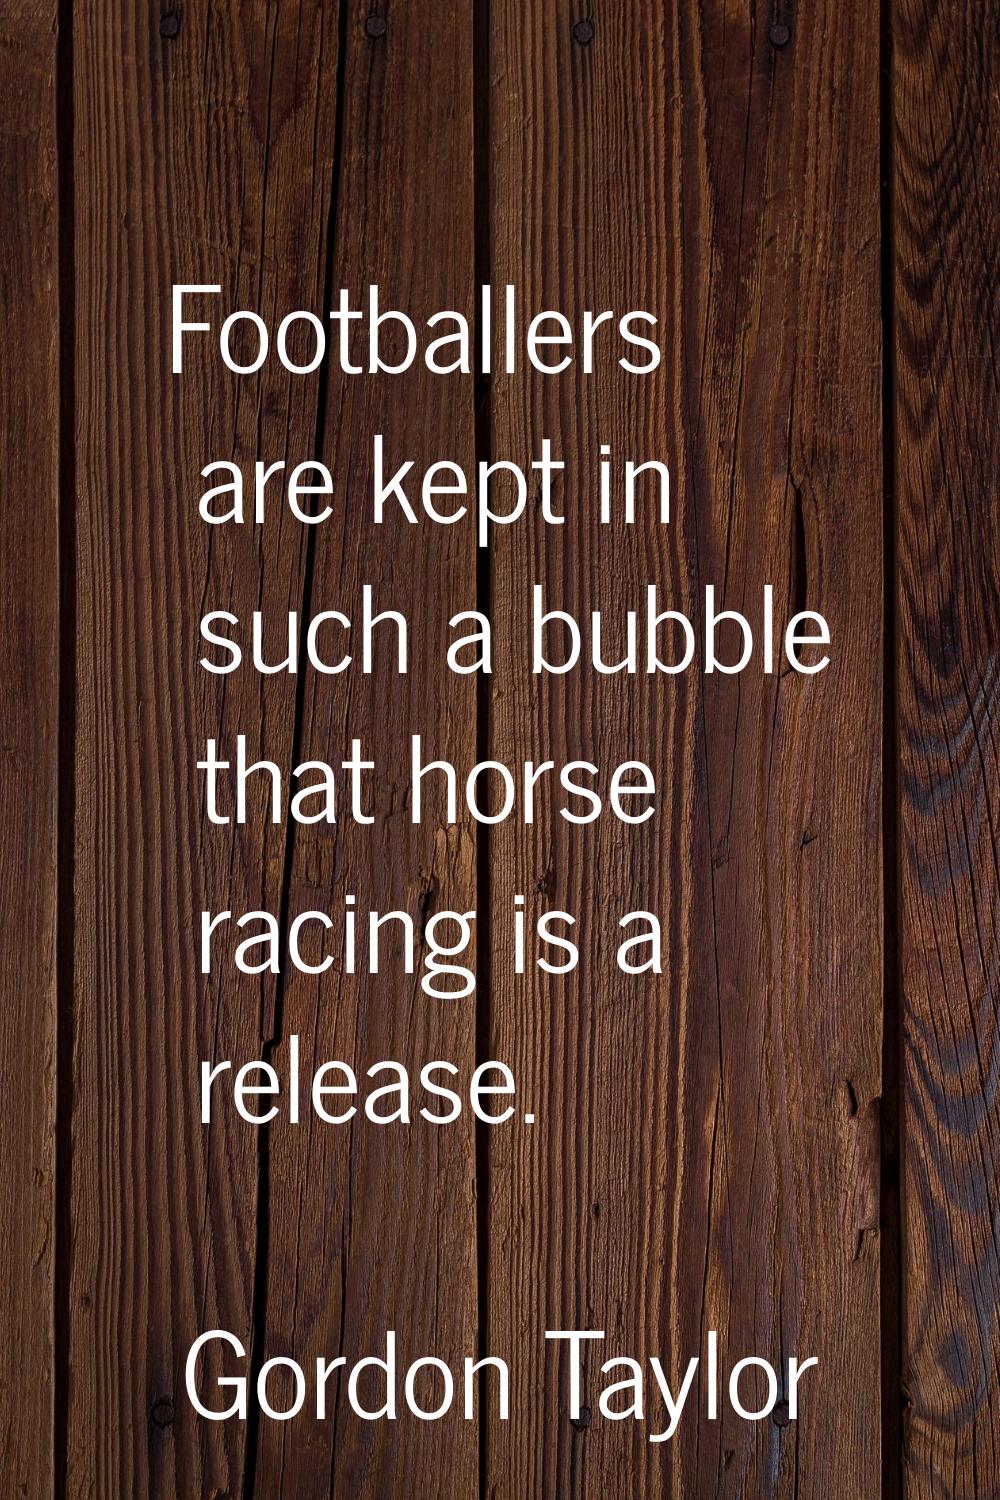 Footballers are kept in such a bubble that horse racing is a release.